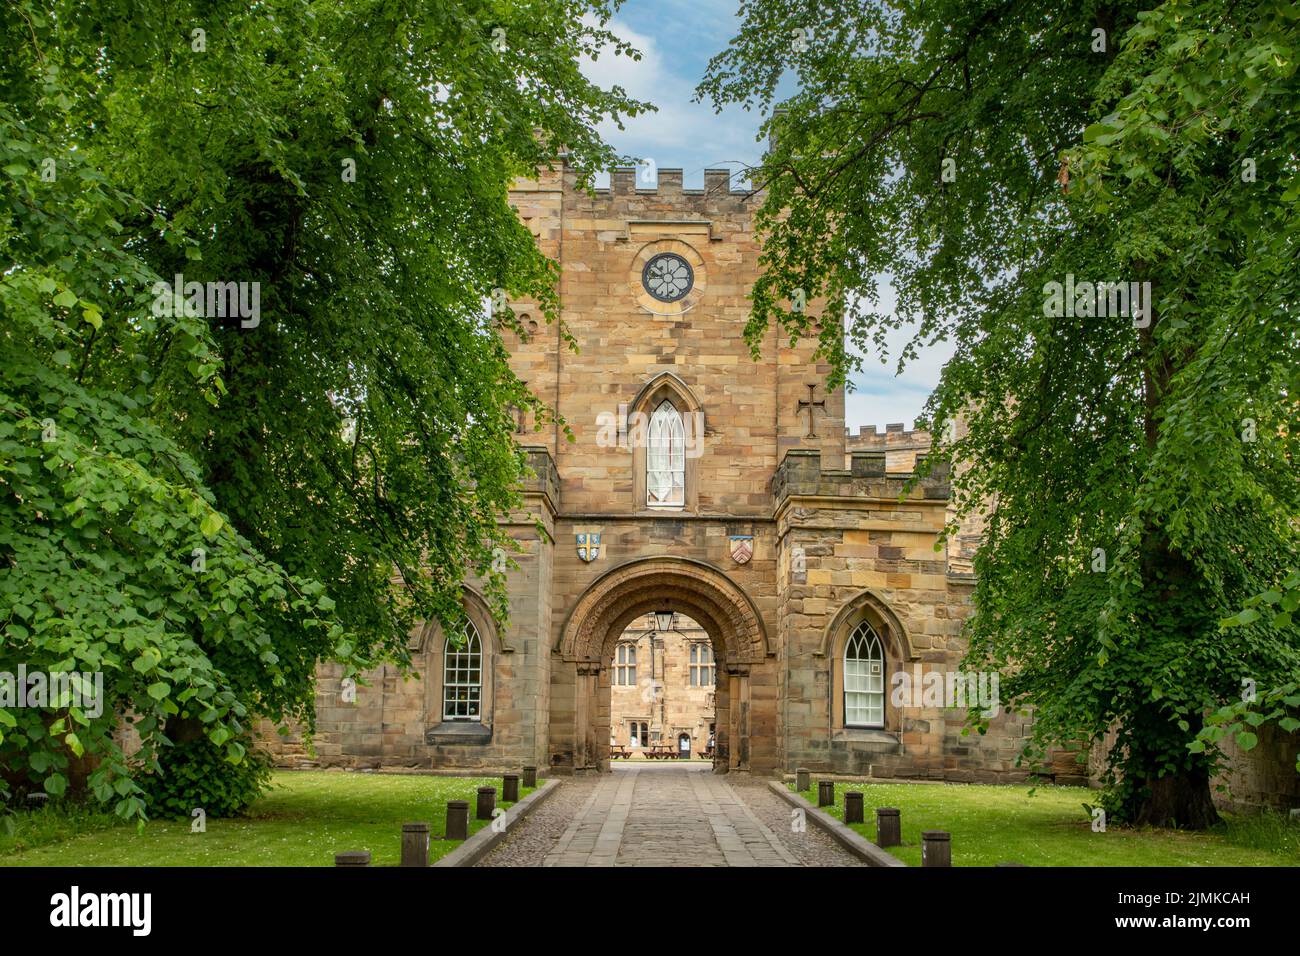 Entrance to the Castle, Durham, England Stock Photo